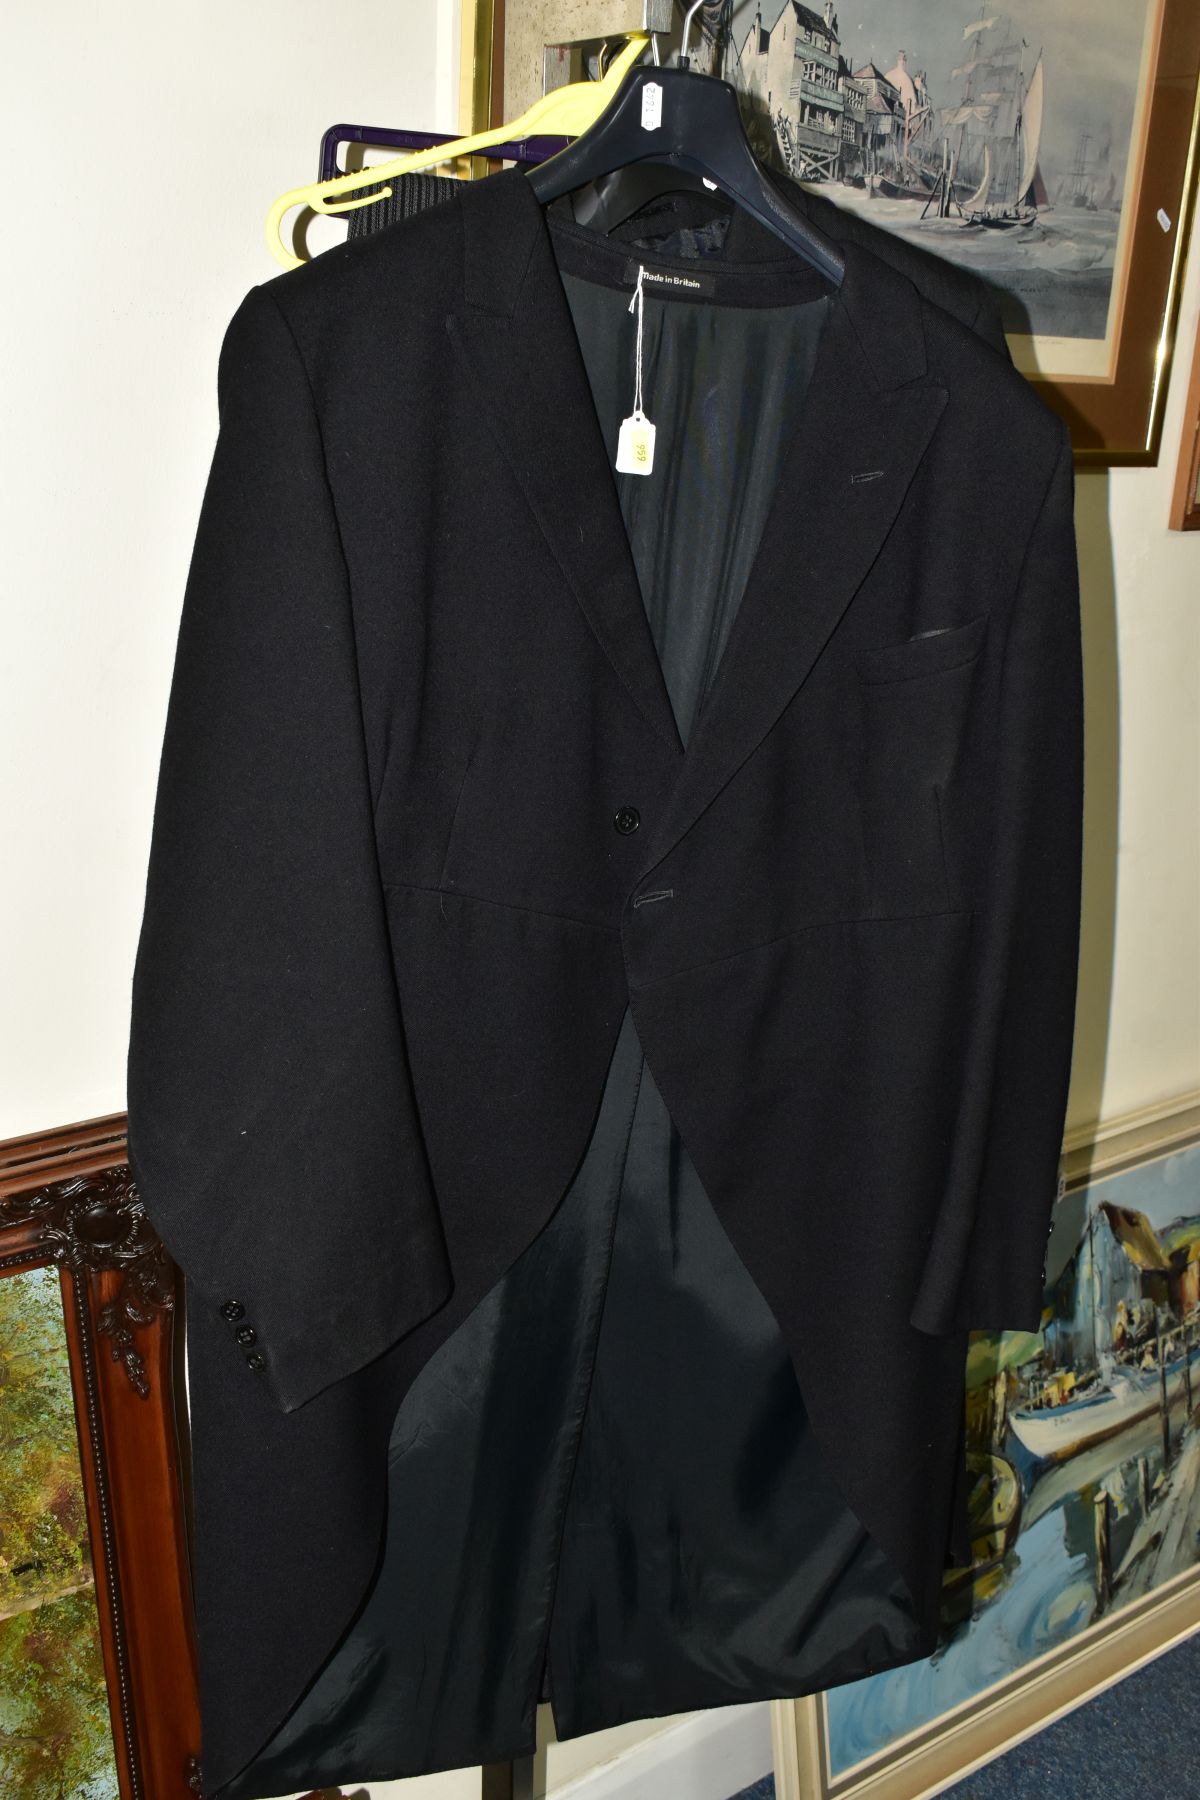 THREE GENTLEMEN'S BLACK WEDDING TAIL COATS AND TWO PAIRS OF TROUSERS, the tails comprise Magee